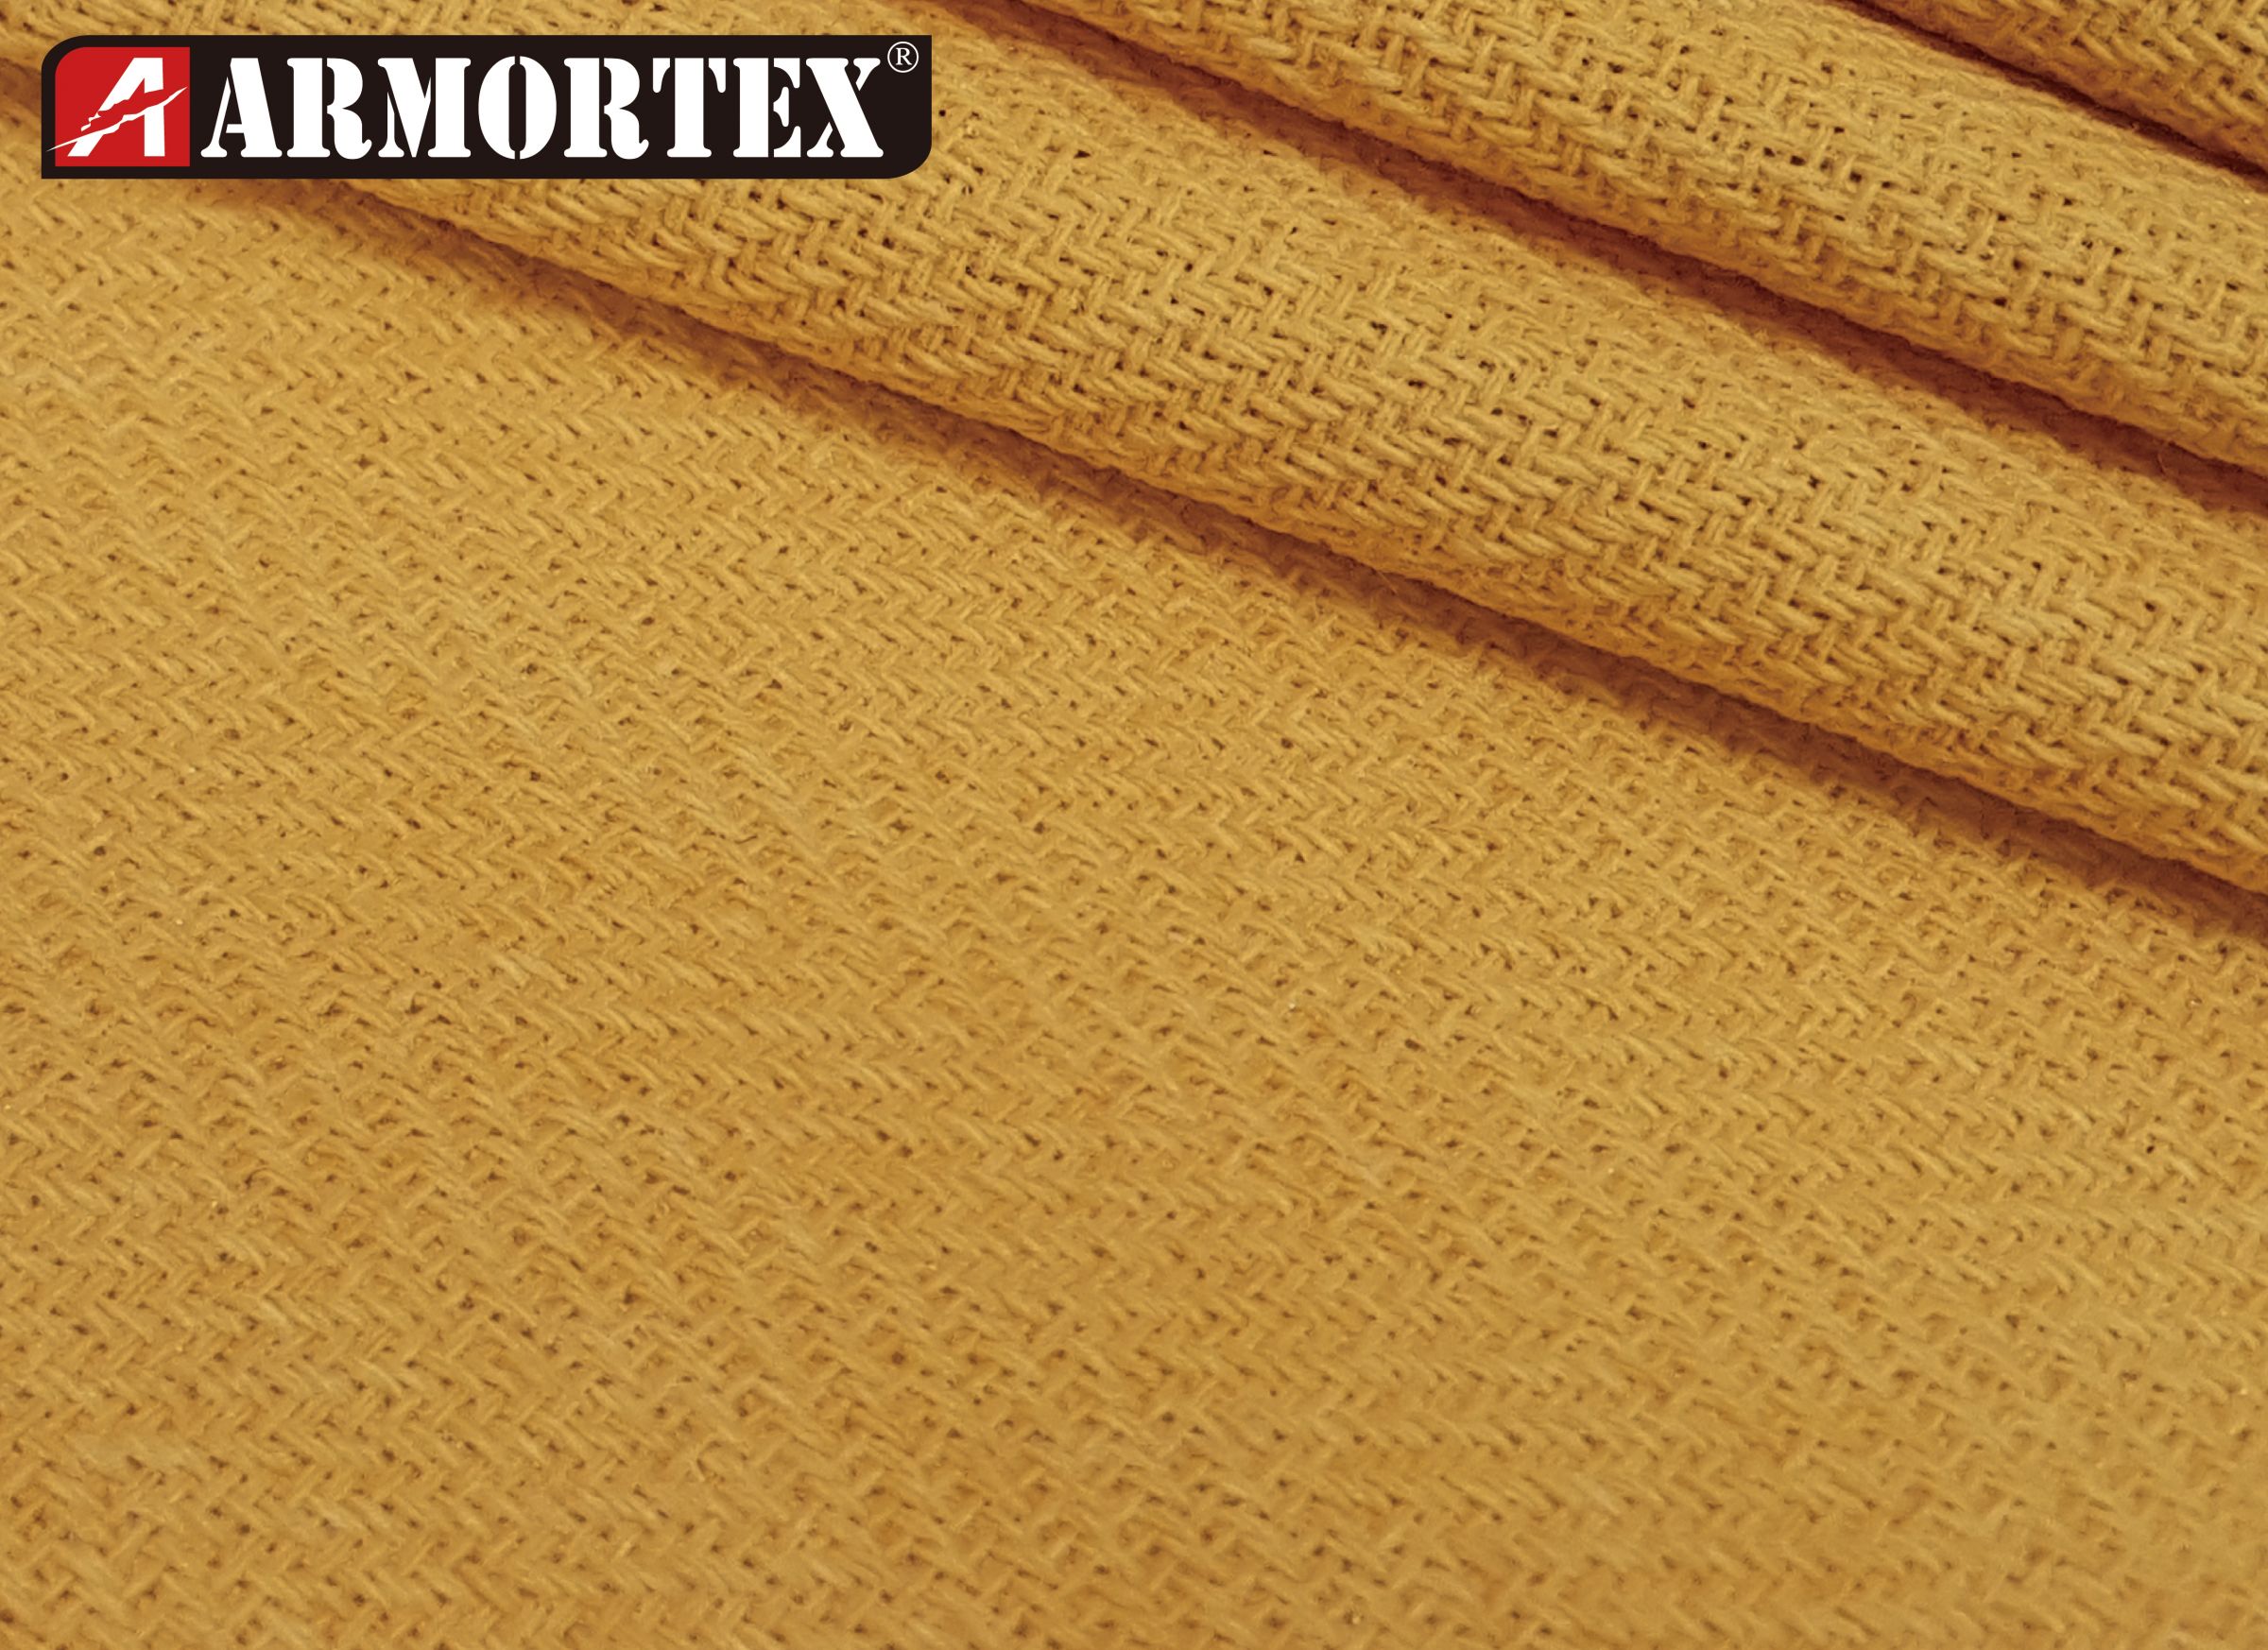 Flame Retardant Fabric Made with FR-PU Coated Kevlar®, Cotton, And